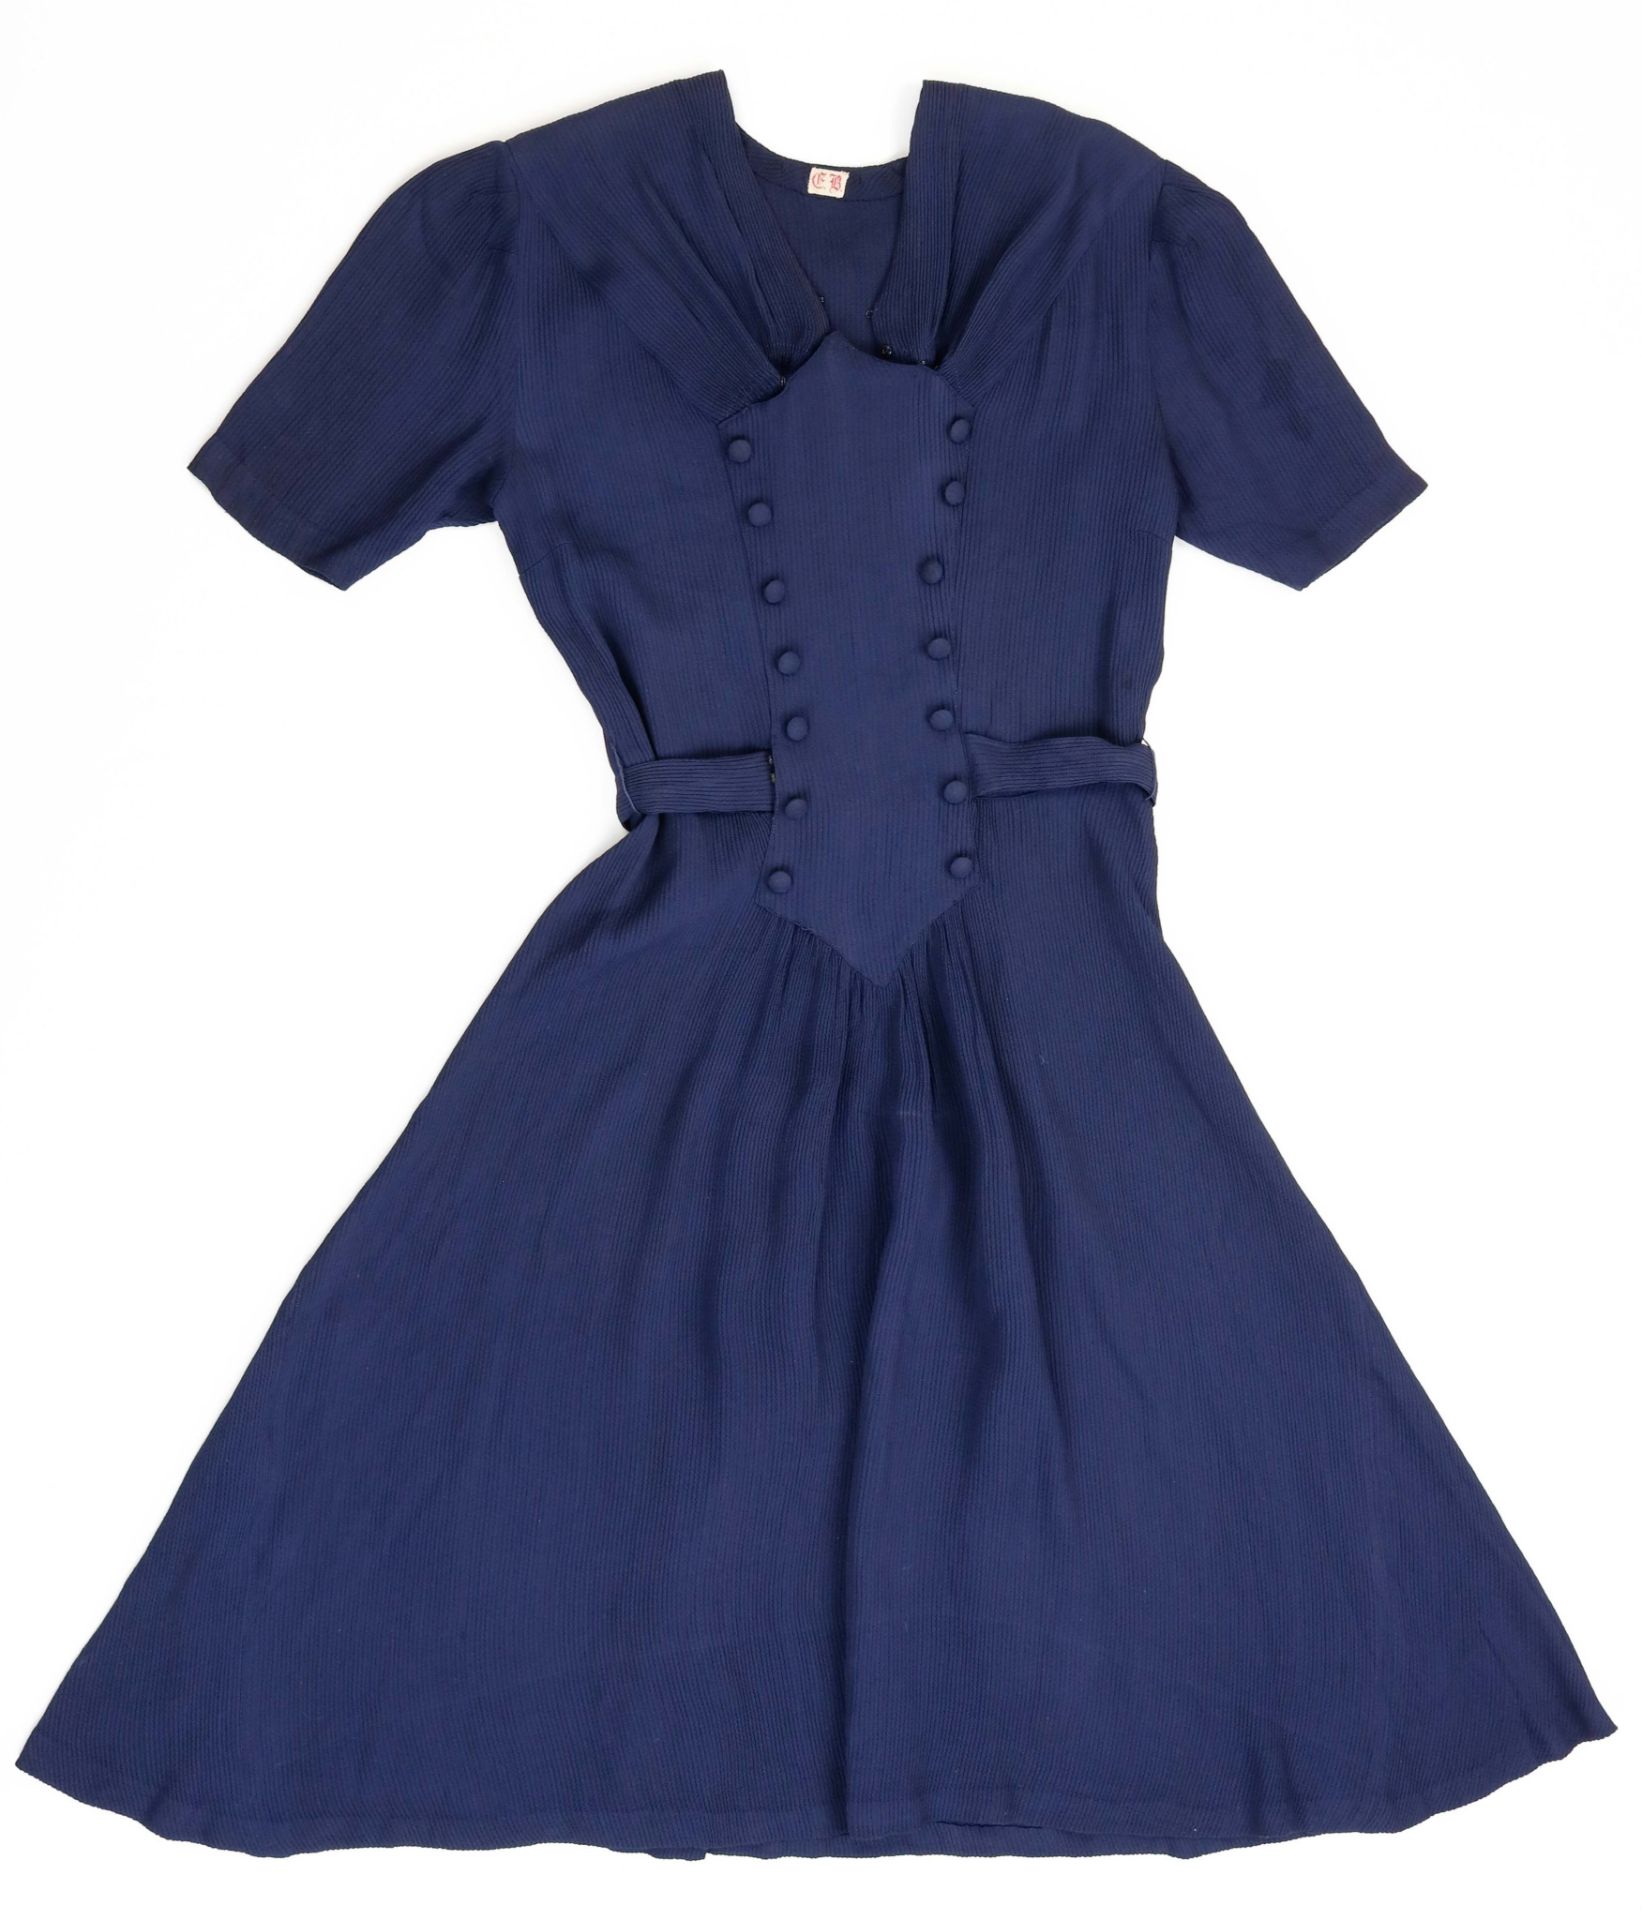 EVA BRAUN'S BELTED BLUE DRESS WITH INITIALED NAME TAG